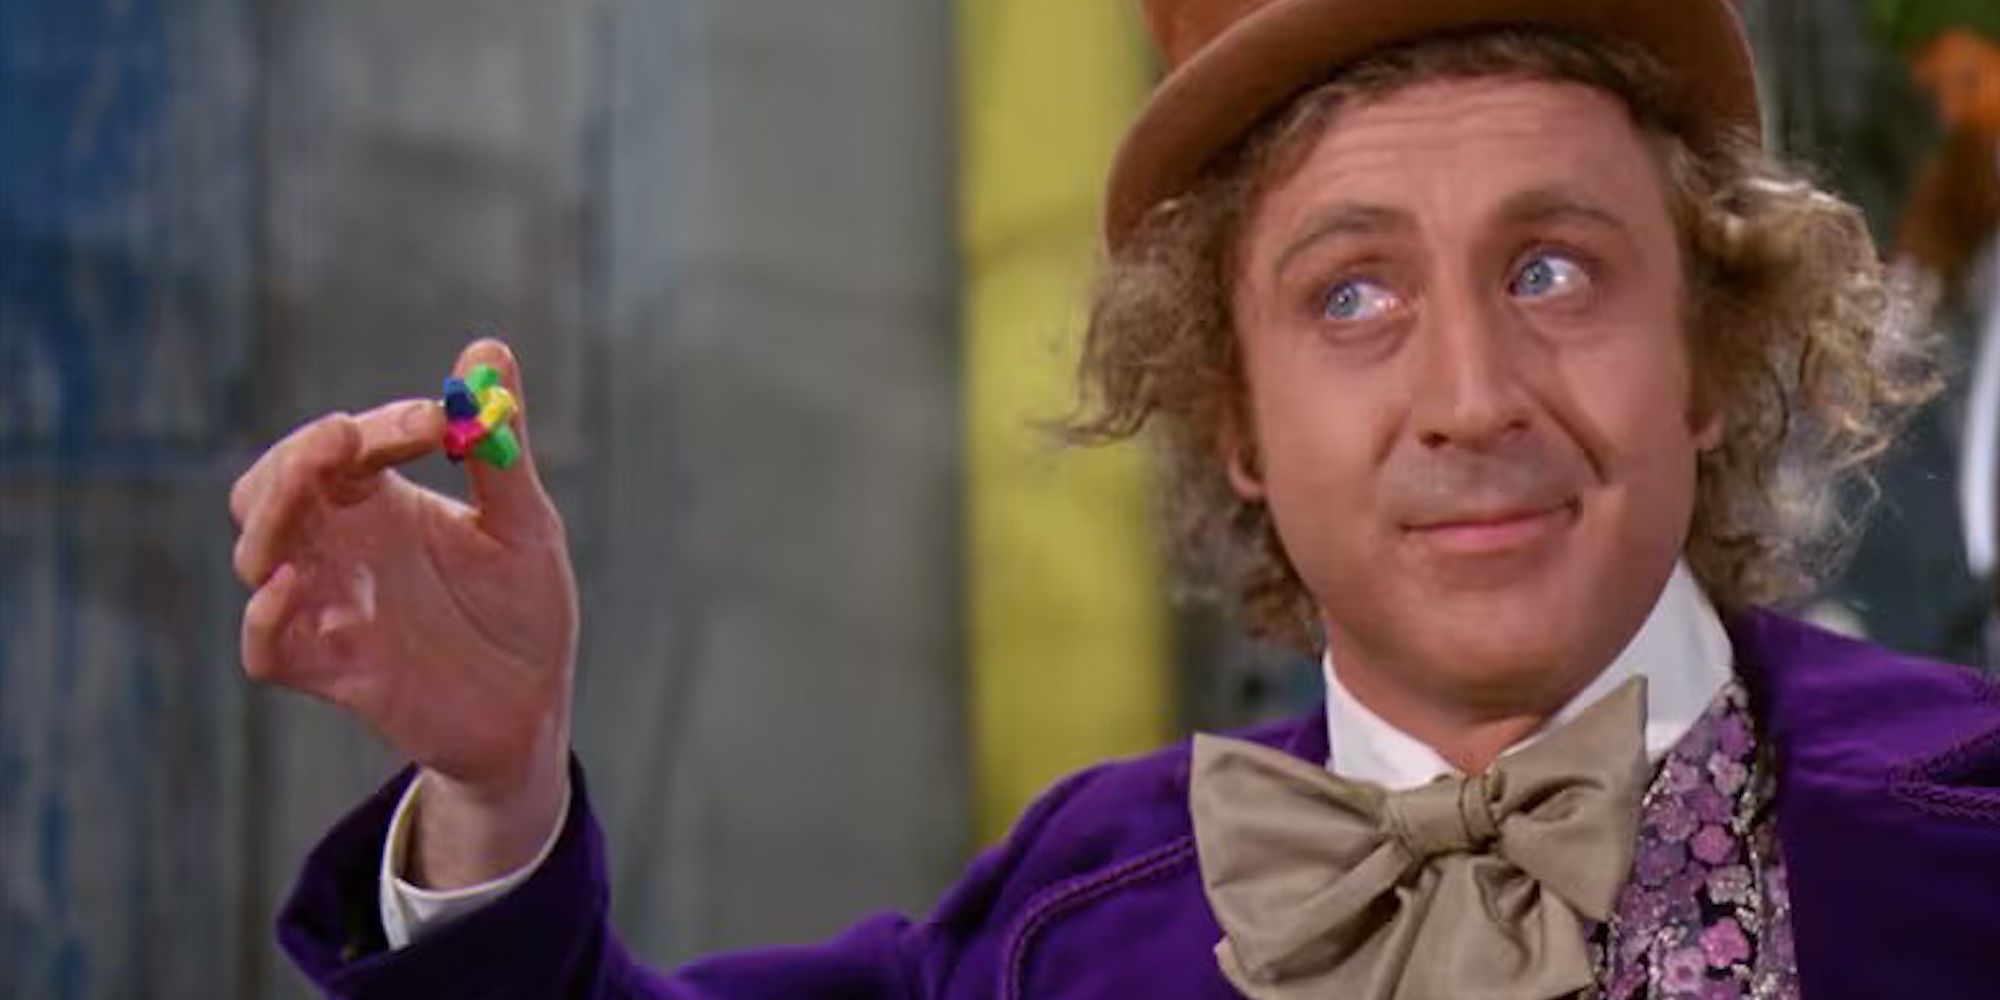 Willy Wonka holding an Everlasting Gobstopper candy in Willy Wonka and the Chocolate Factory0